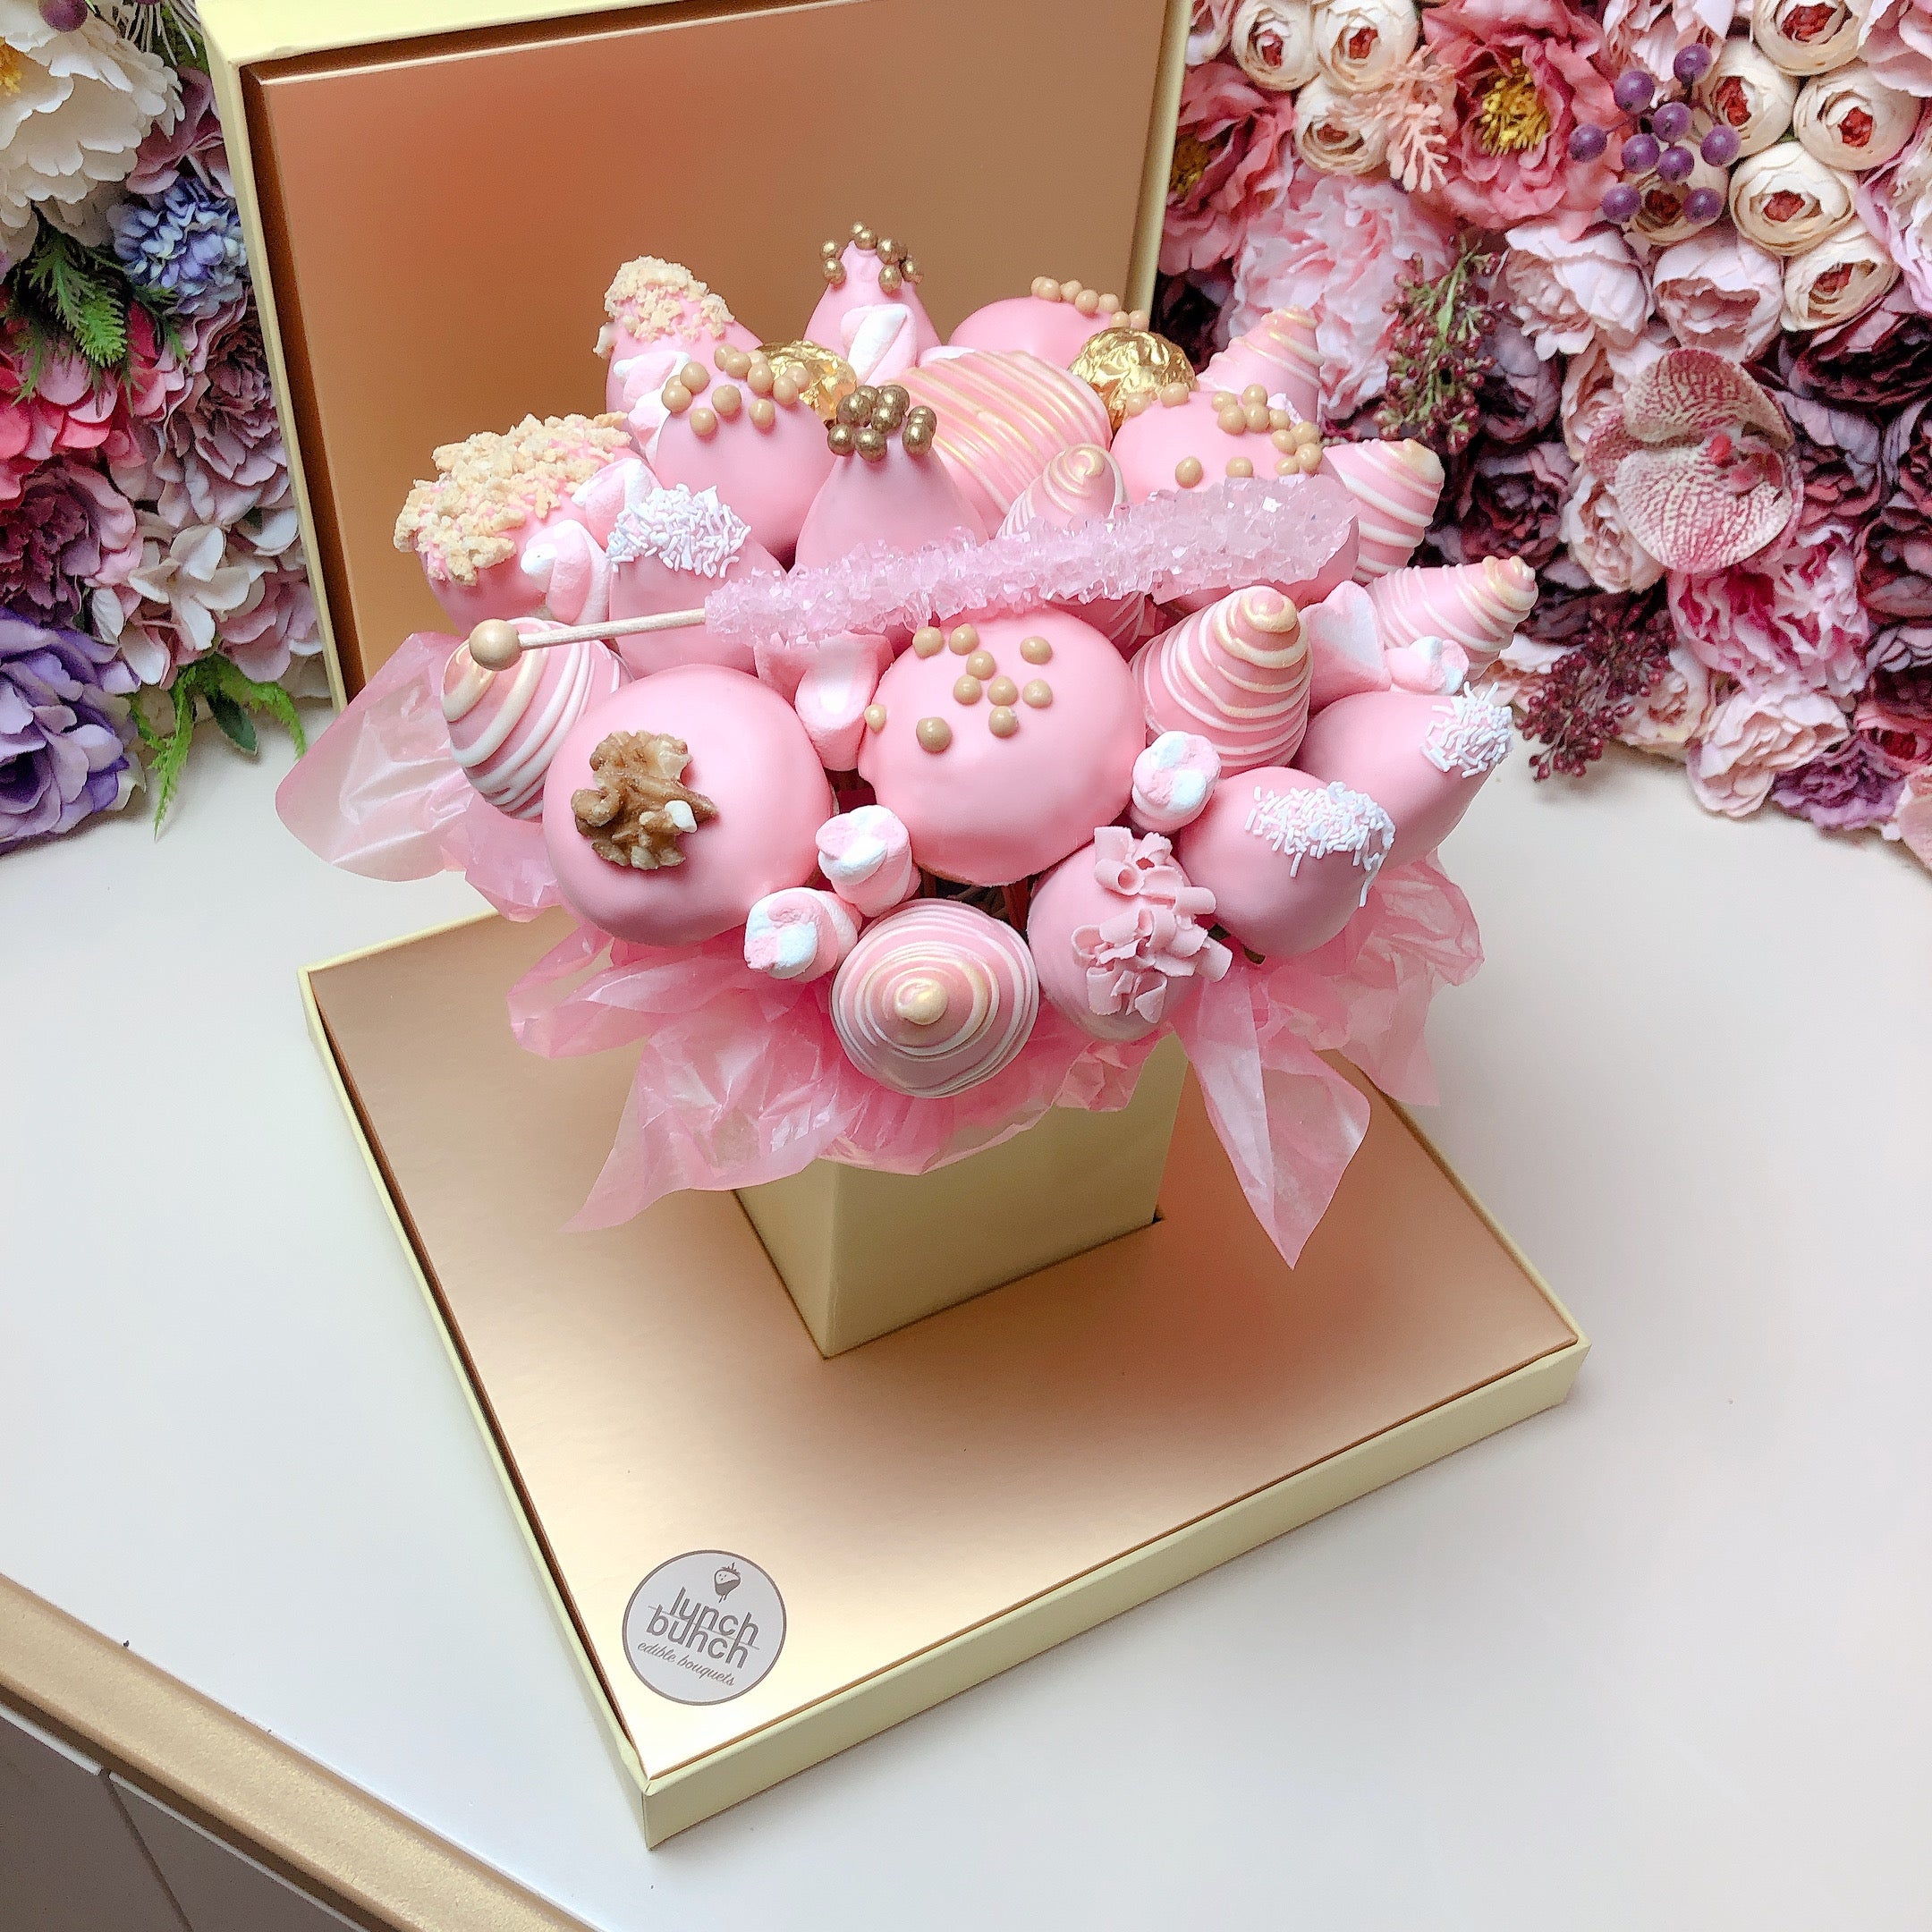 sweet bouquet of chocolate covered strawberries and donuts in pink colour wrapping